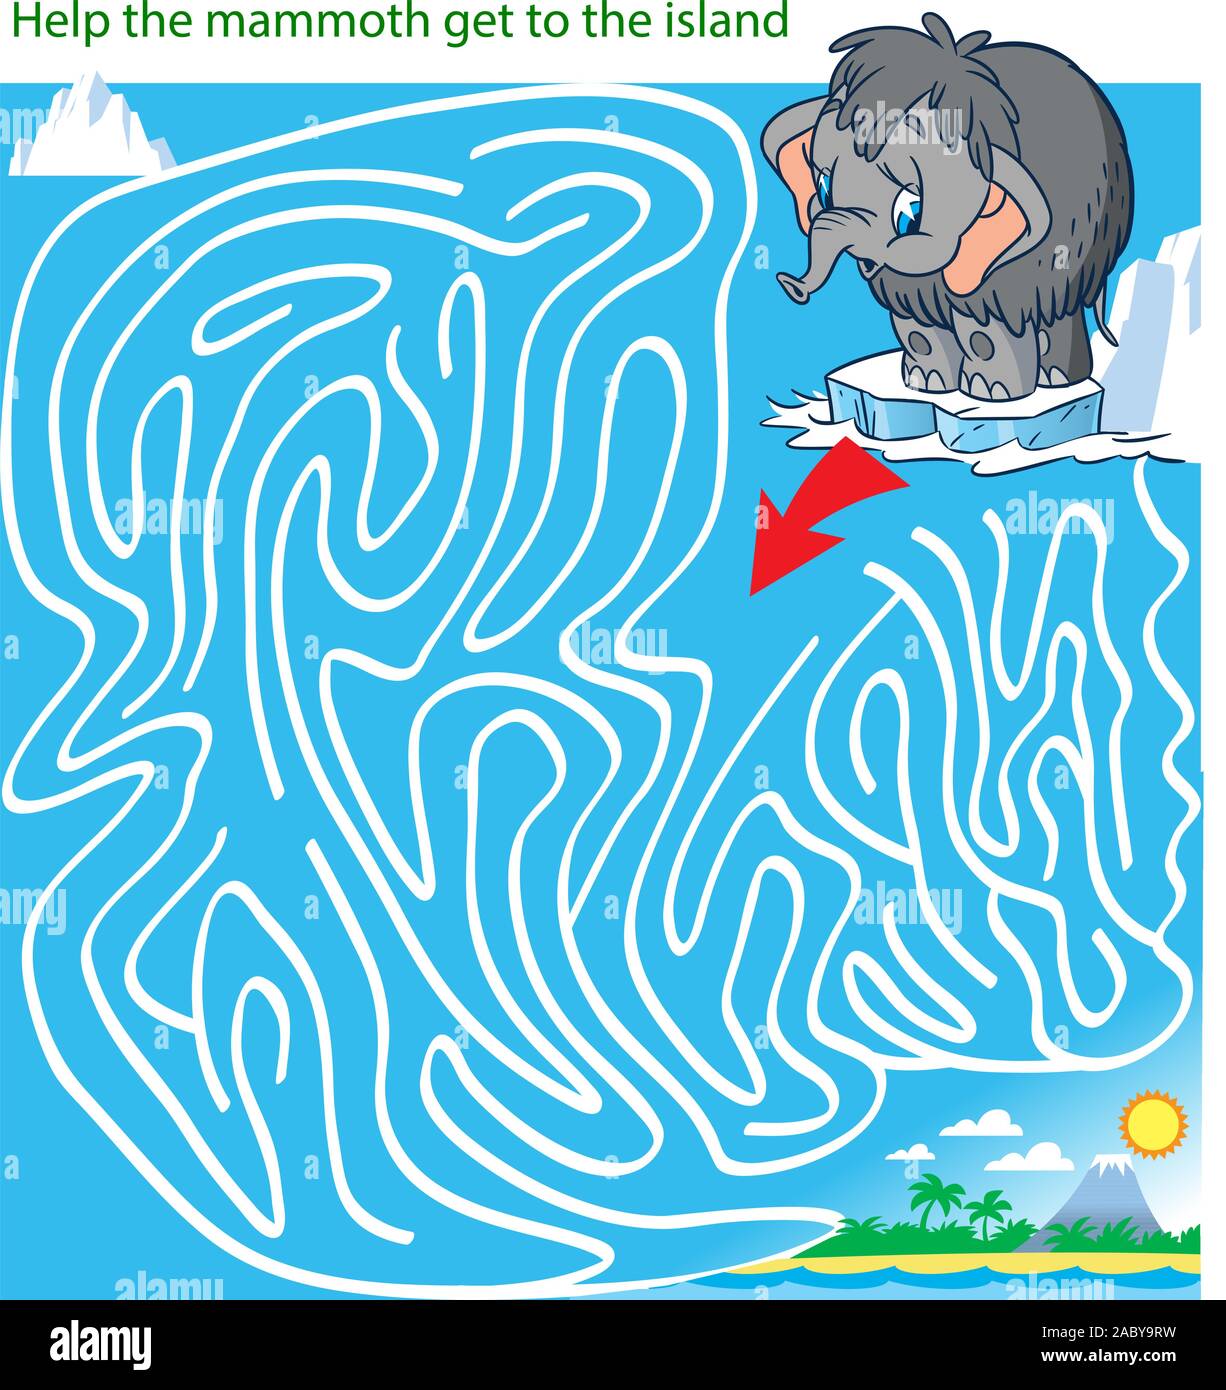 Vector illustration with a puzzle in which it is necessary to help the mammoth to get to the island Stock Vector